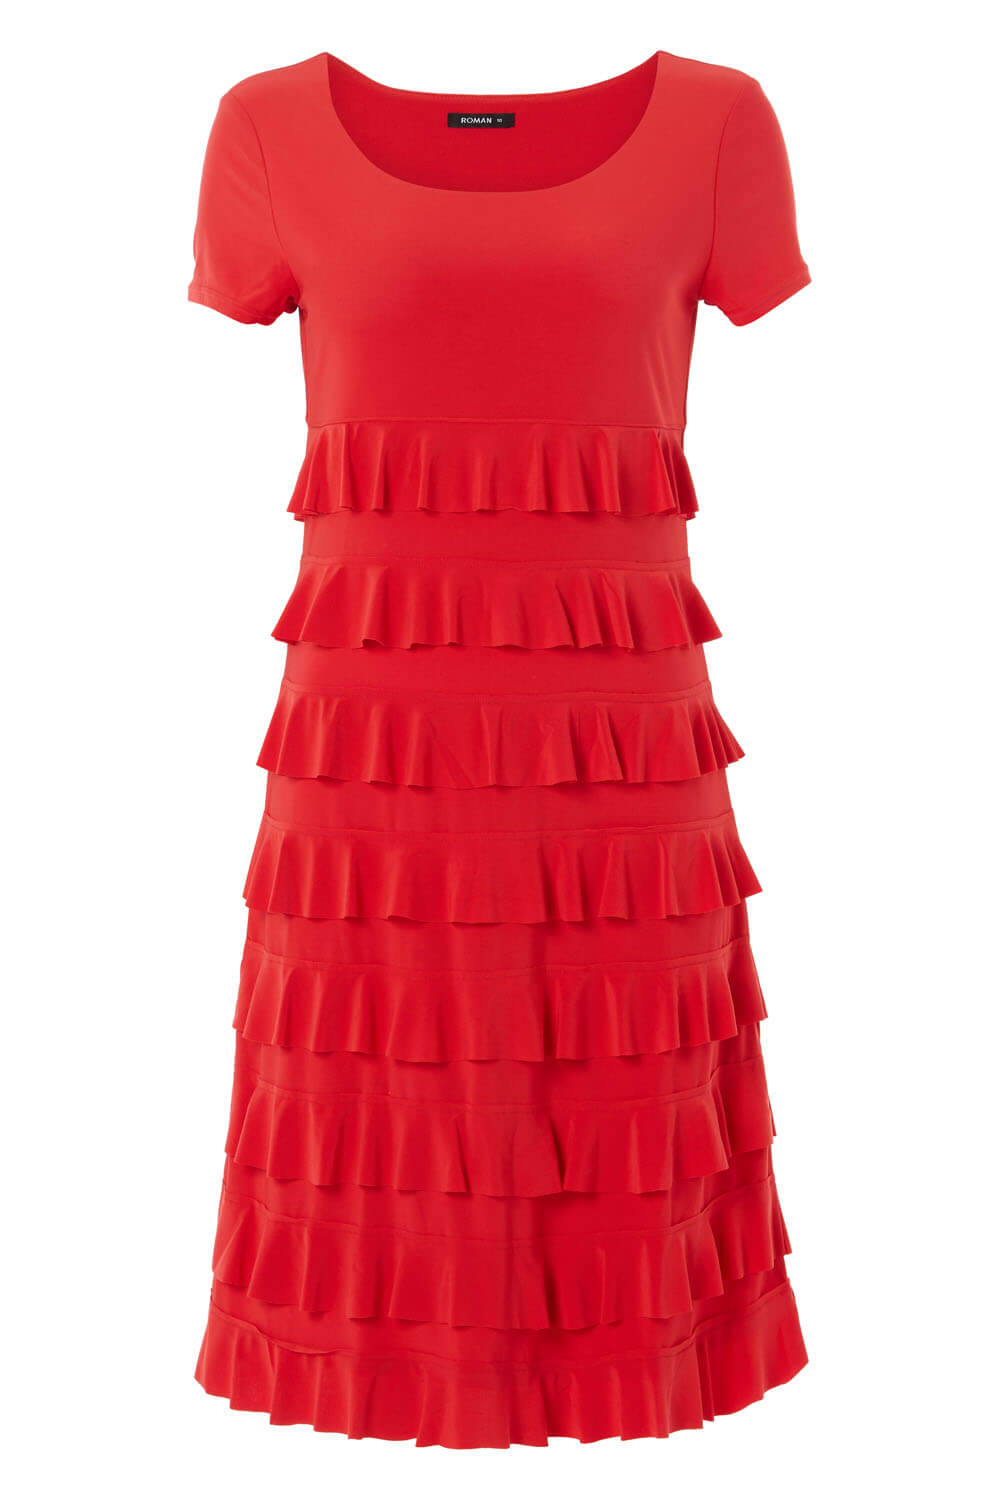 Red  Frill Tiered Dress, Image 5 of 5